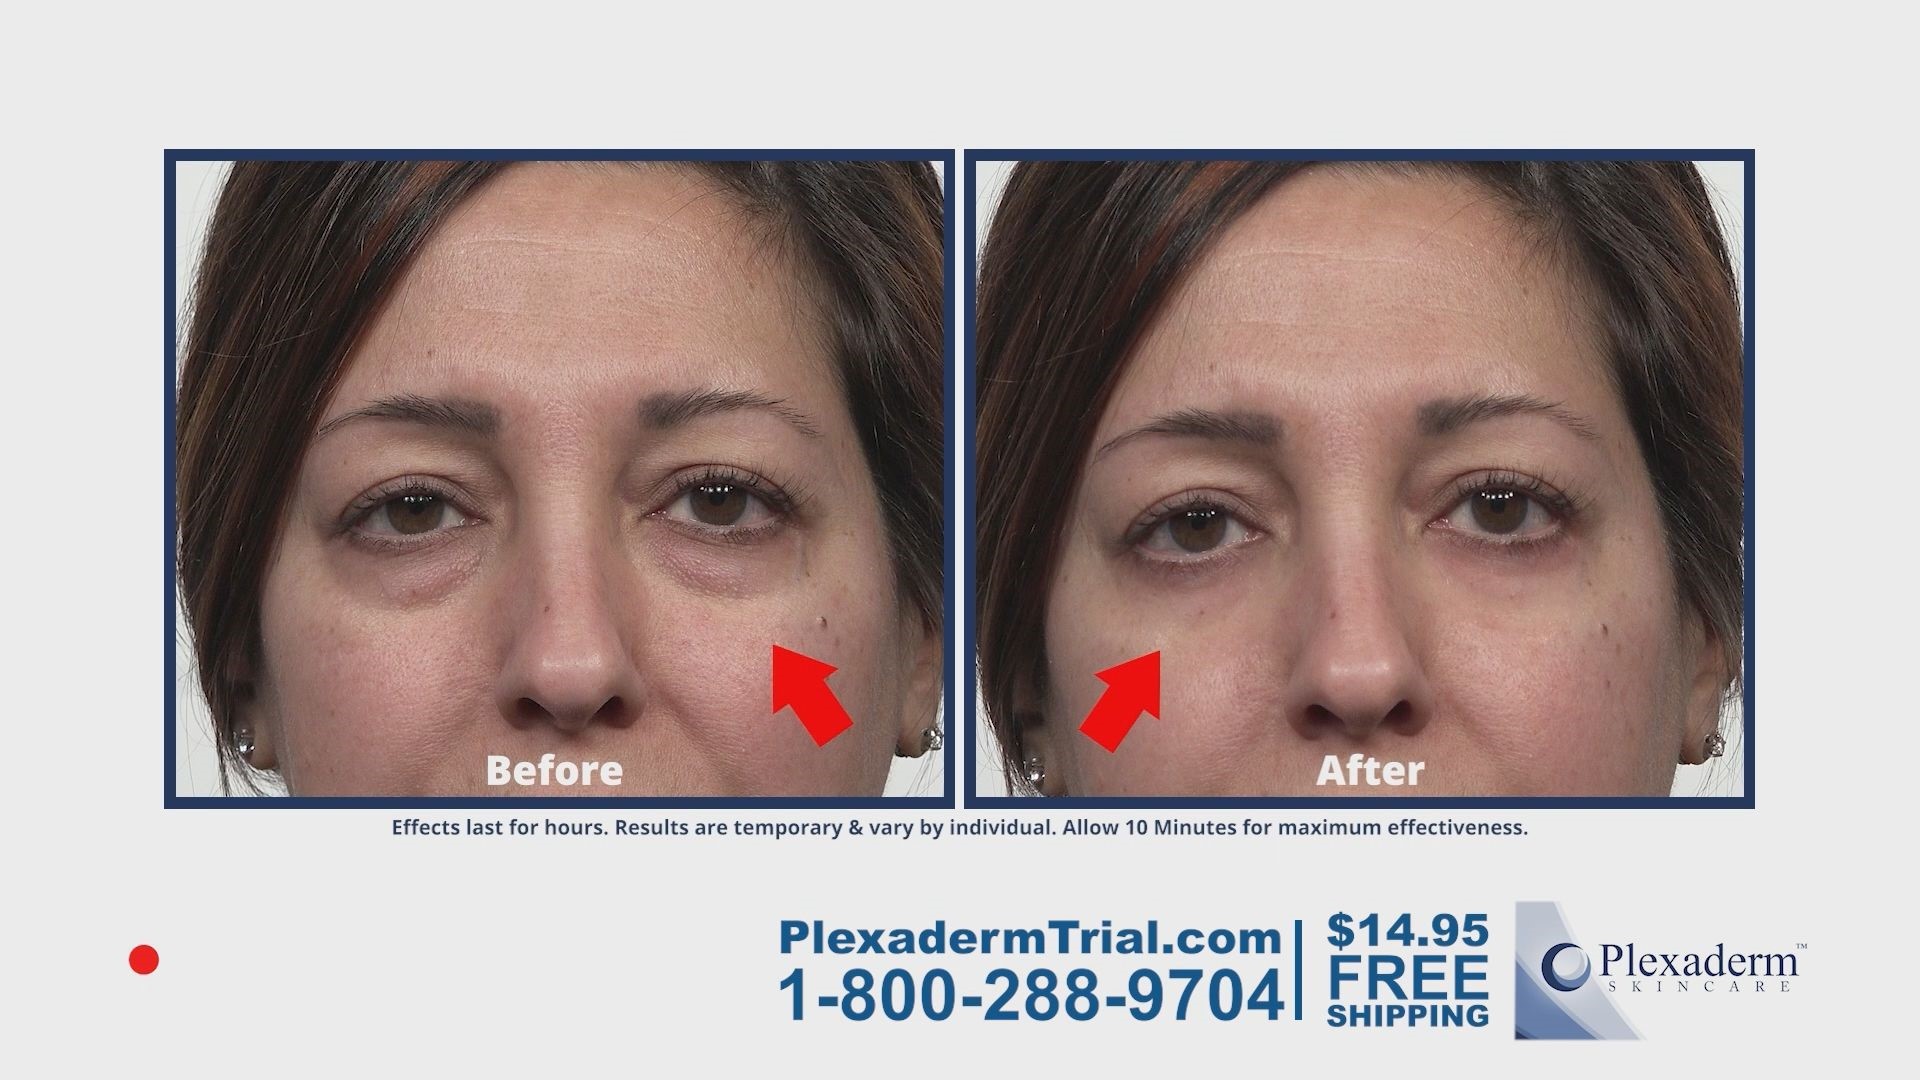 Plexaderm smooths skin surrounding under-eye bags making them shrink from view in minutes.